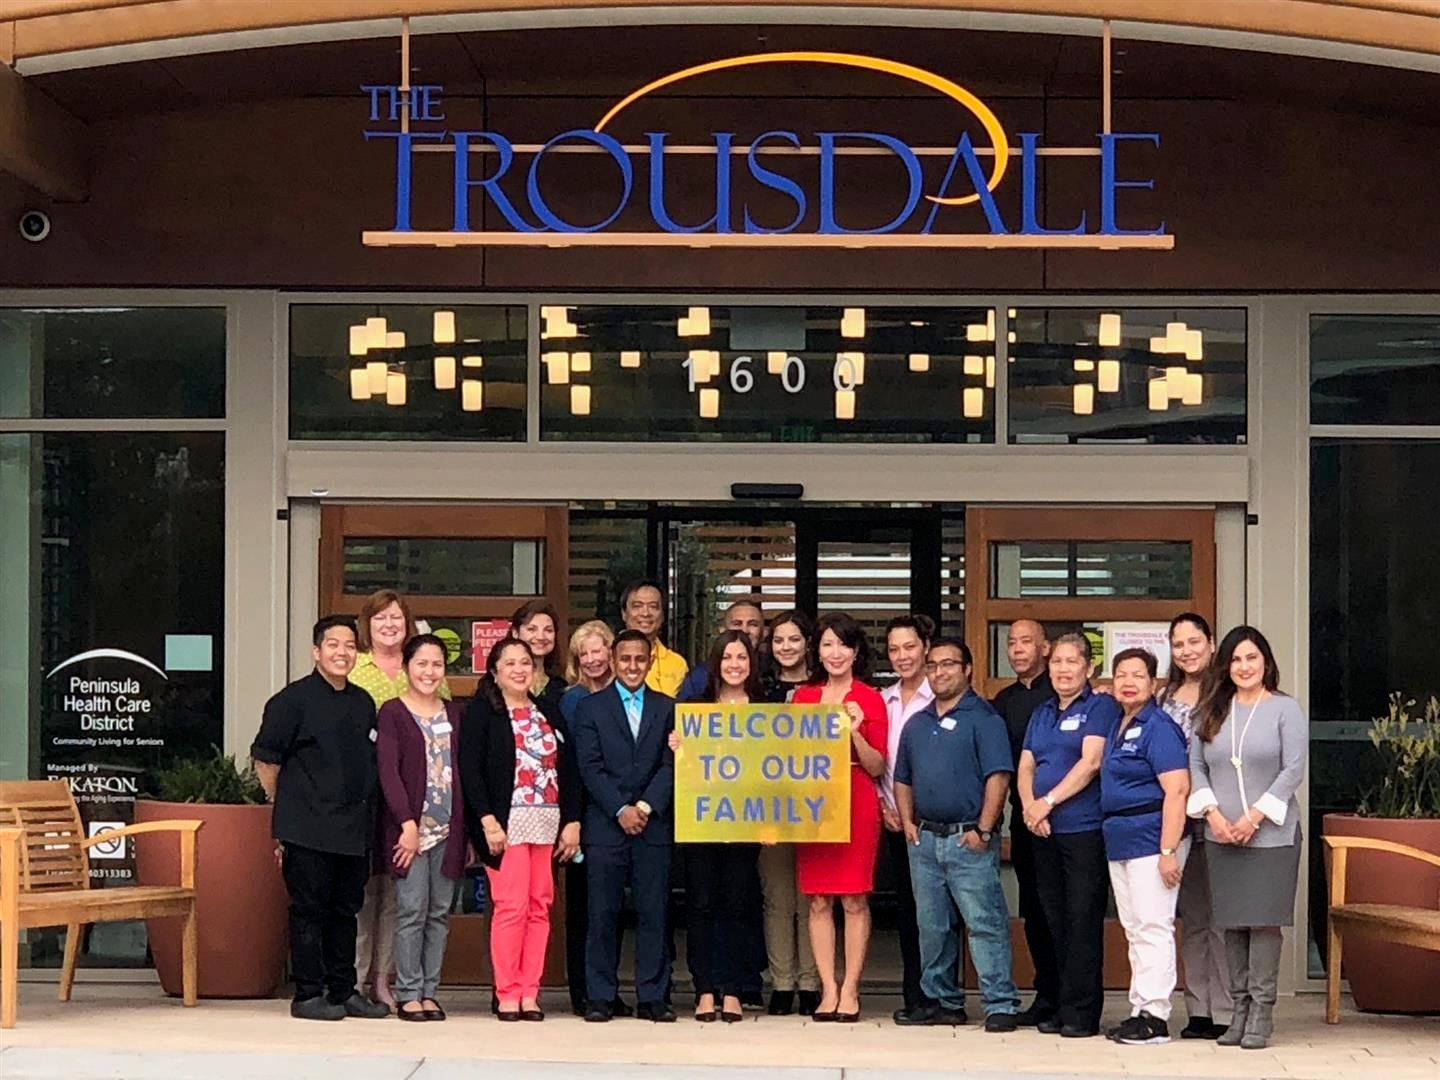 The Trousdale staff members holding a "Welcome to Our Family" sign